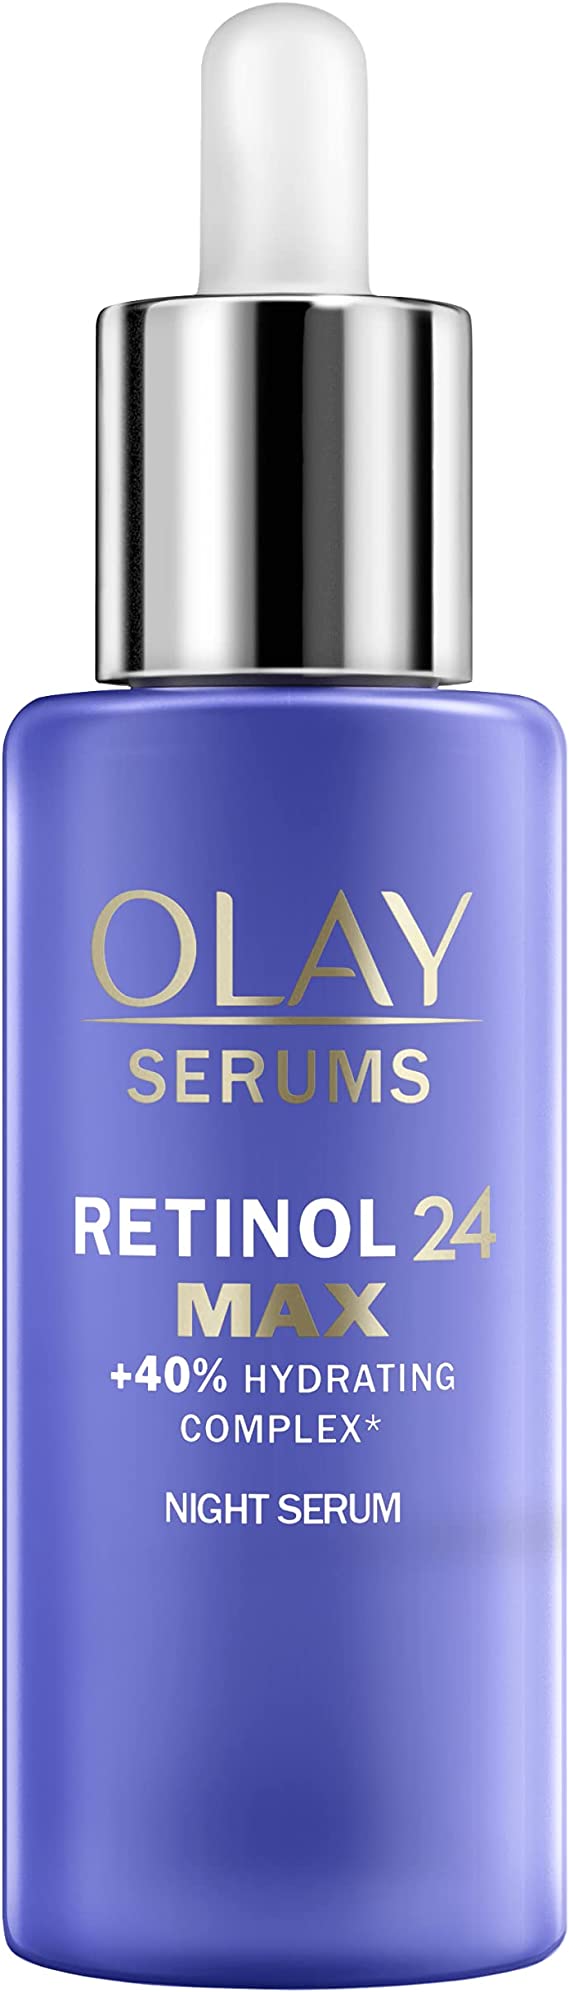 Olay Retinol 24 MAX Night Serum With 40% More Retinol Complex, Advanced Anti-Ageing Face Serum For Firmer Skin, Reduces Wrinkles, Fine Lines And Pigmentation, Olay's Strongest Retinoid Complex, 40 ml